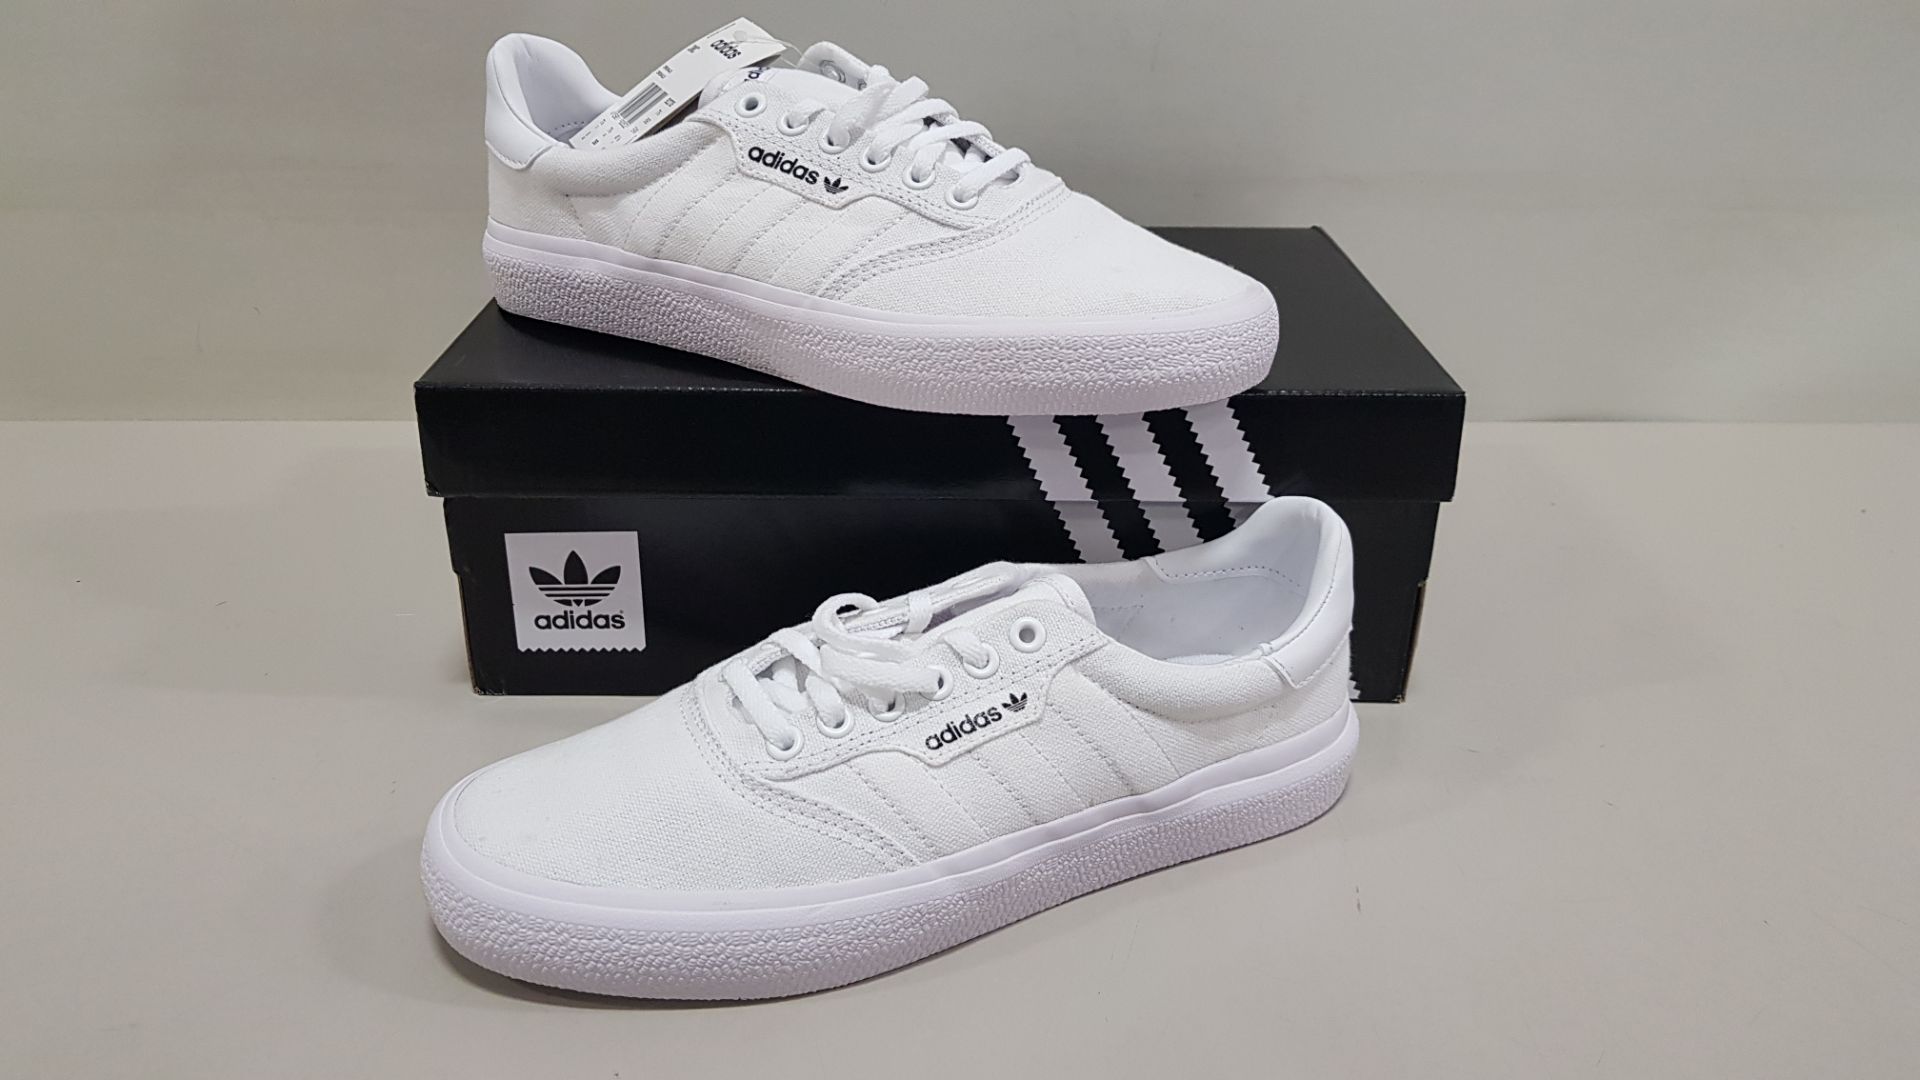 6 X ADIDAS ORIGINALS TRIPLE WHITE 3MC TRAINERS UK SIZE 7 AND 6.5 (PLEASE NOTE SOME SHOES ARE